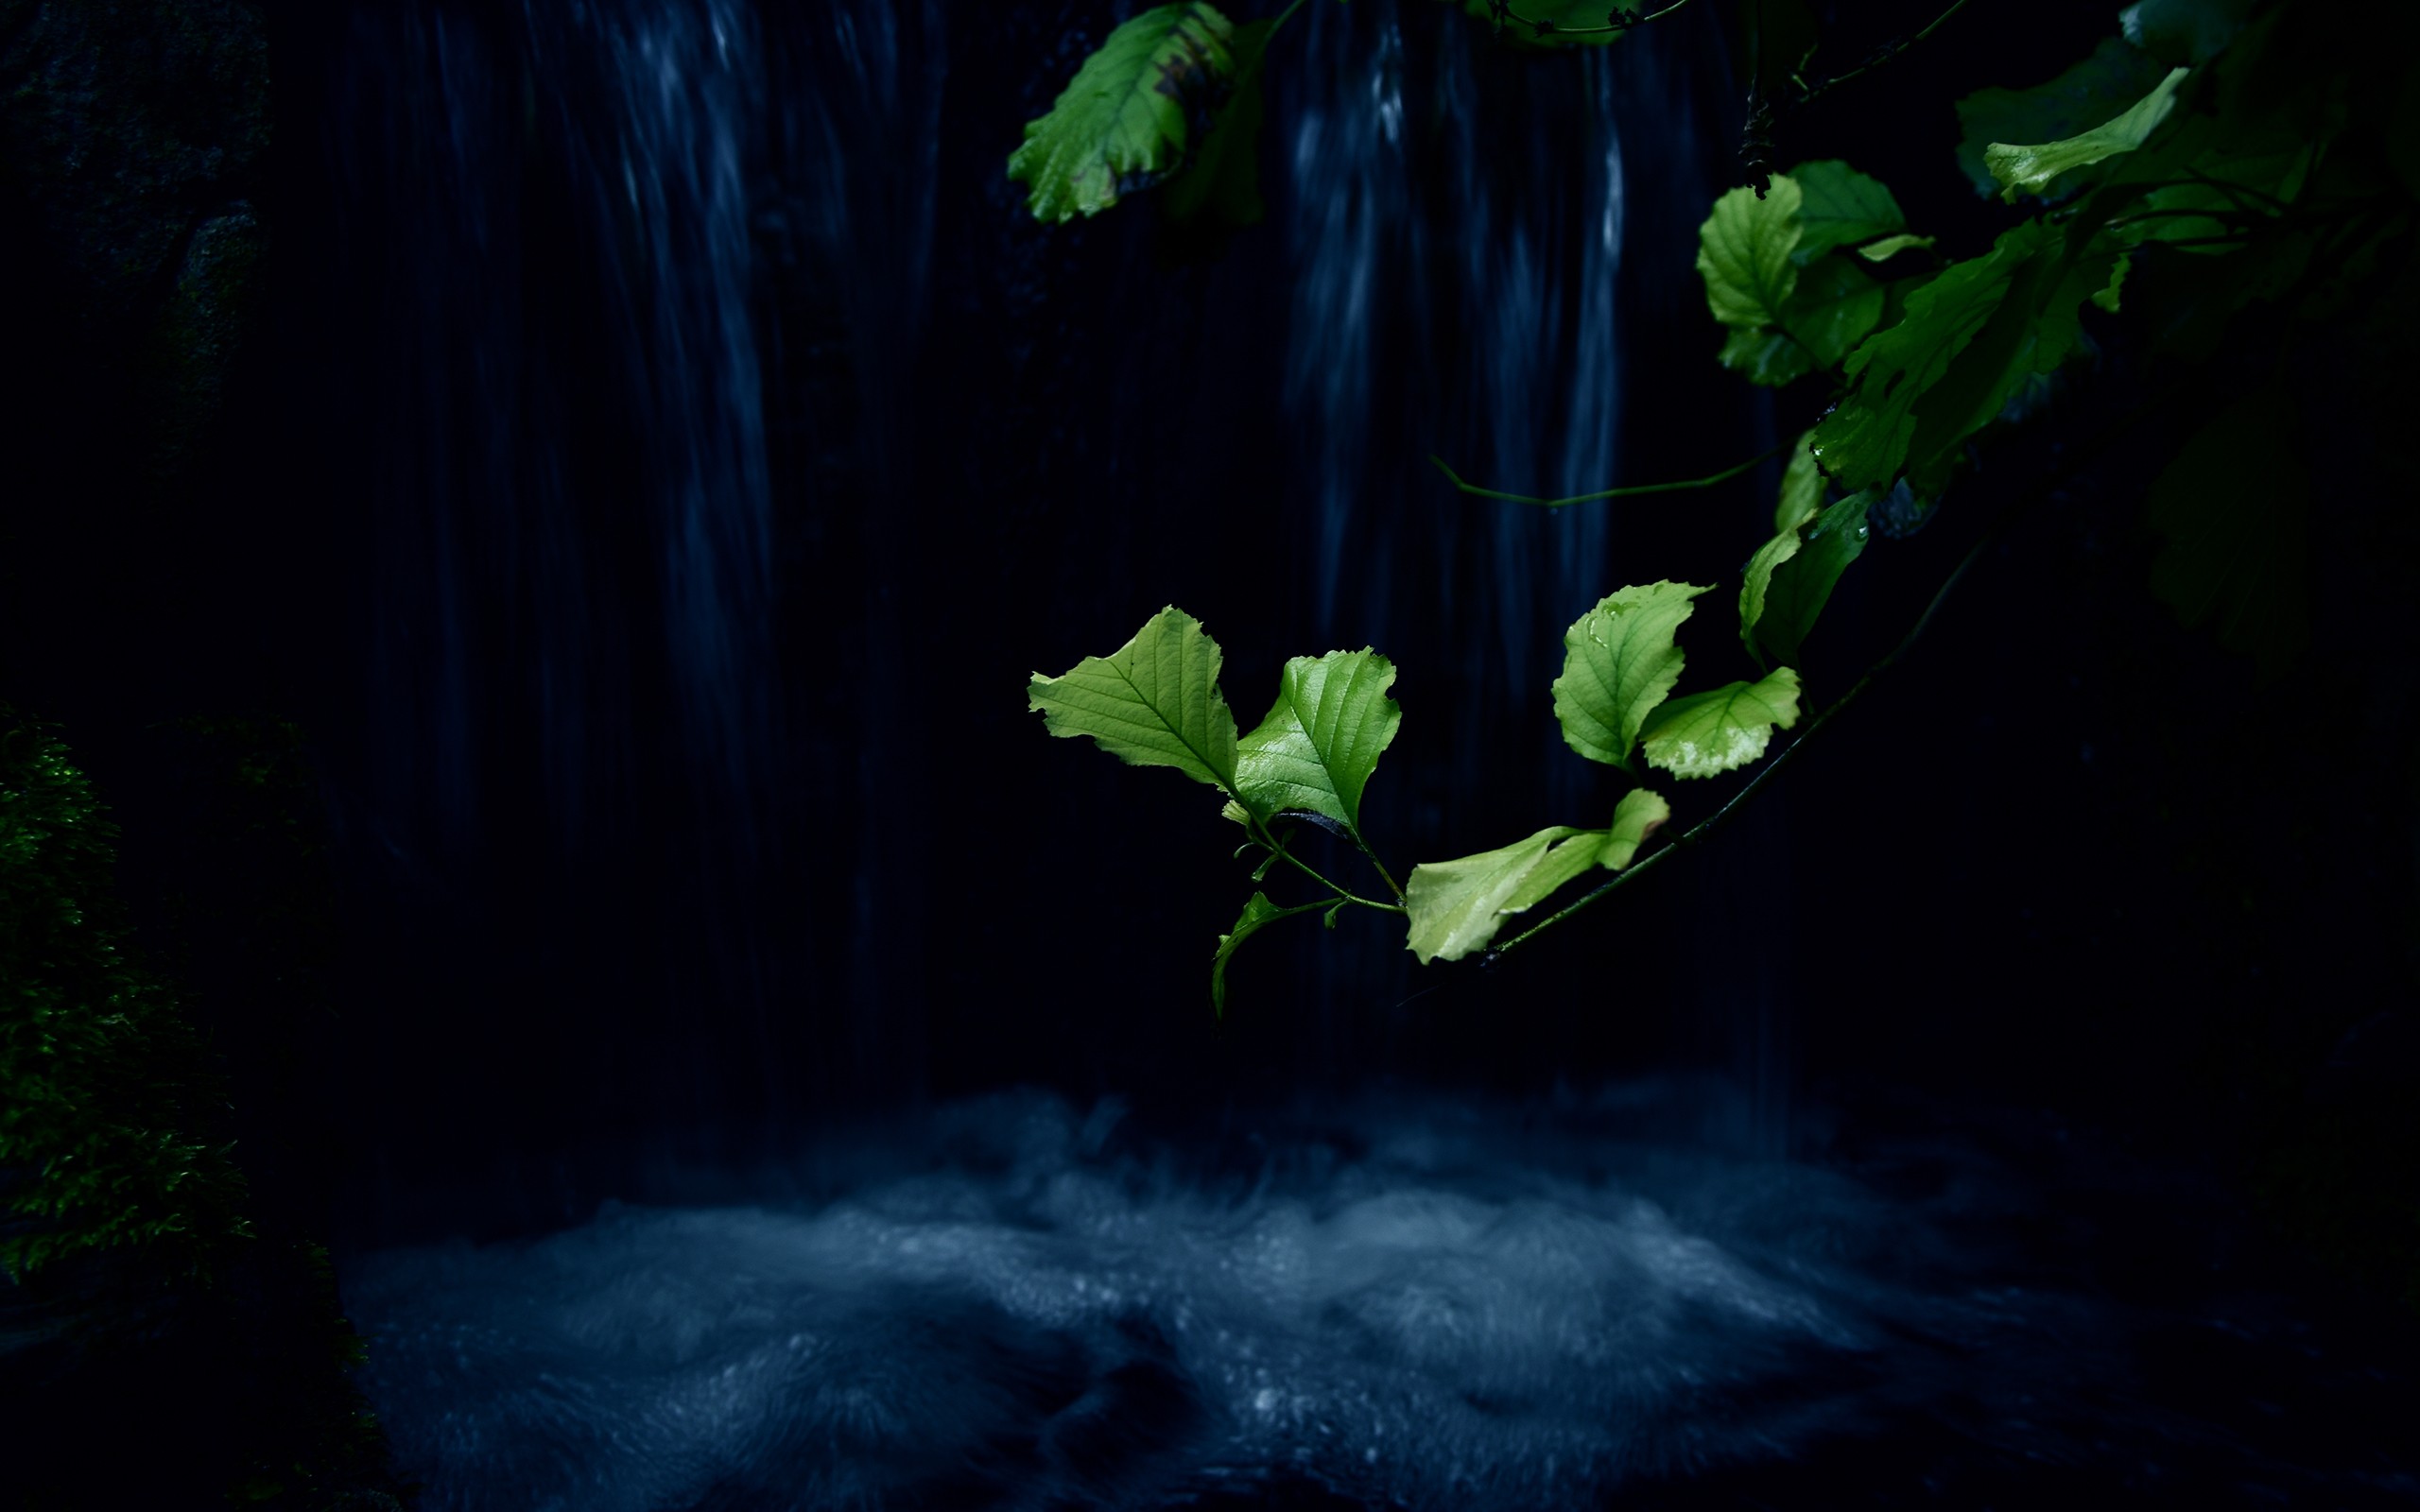 General 2560x1600 plants lake night nature outdoors waterfall leaves low light